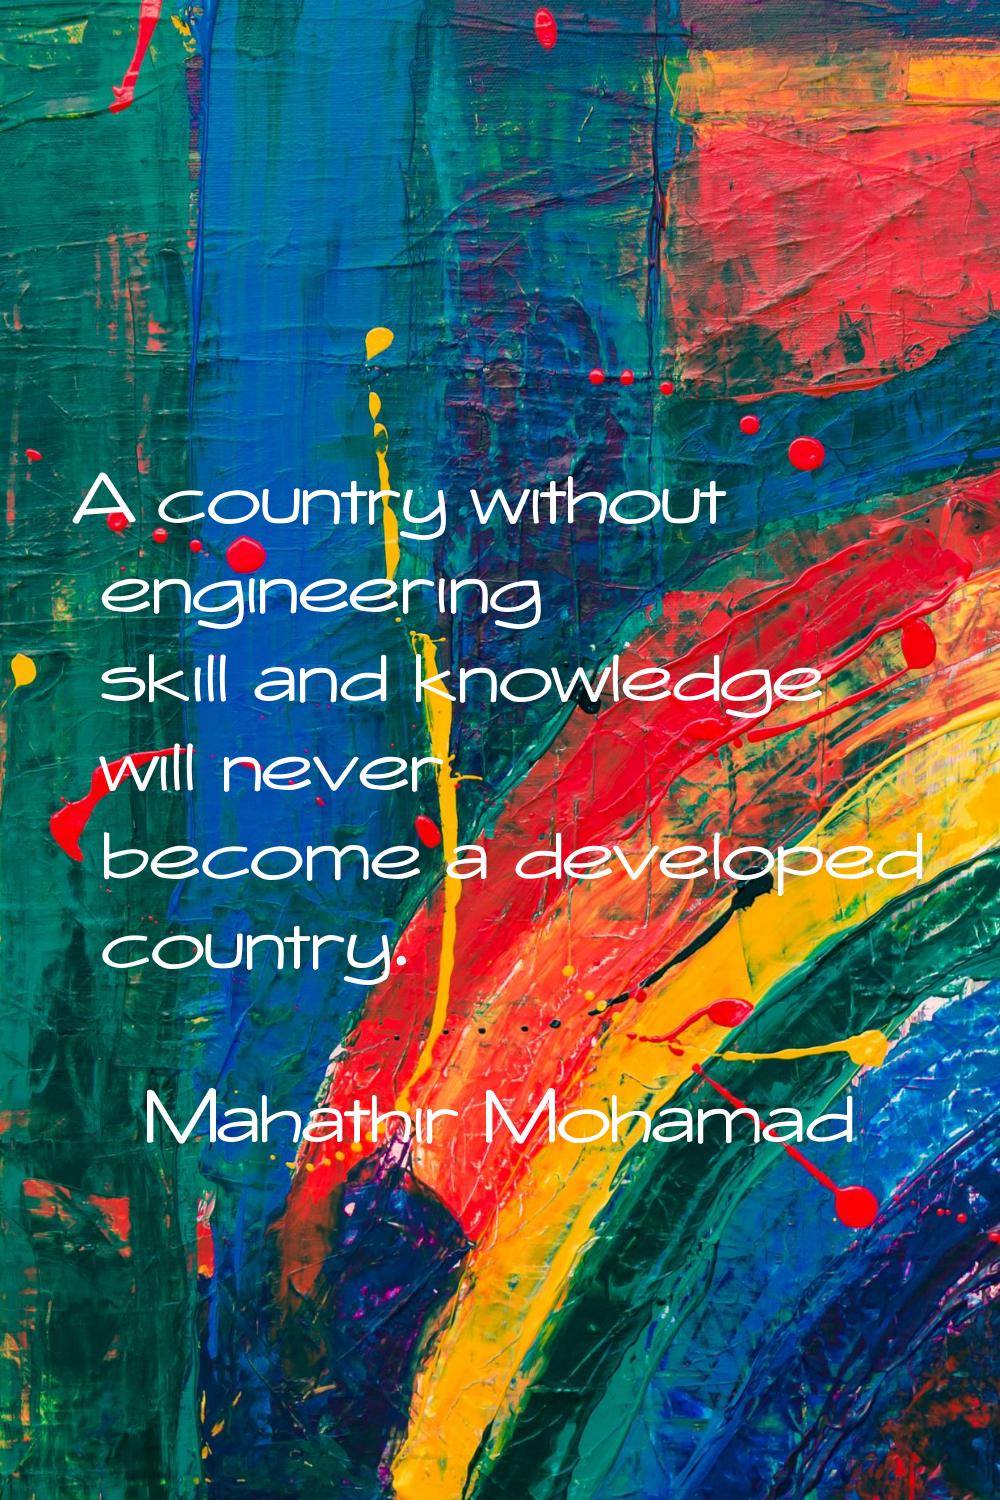 A country without engineering skill and knowledge will never become a developed country.